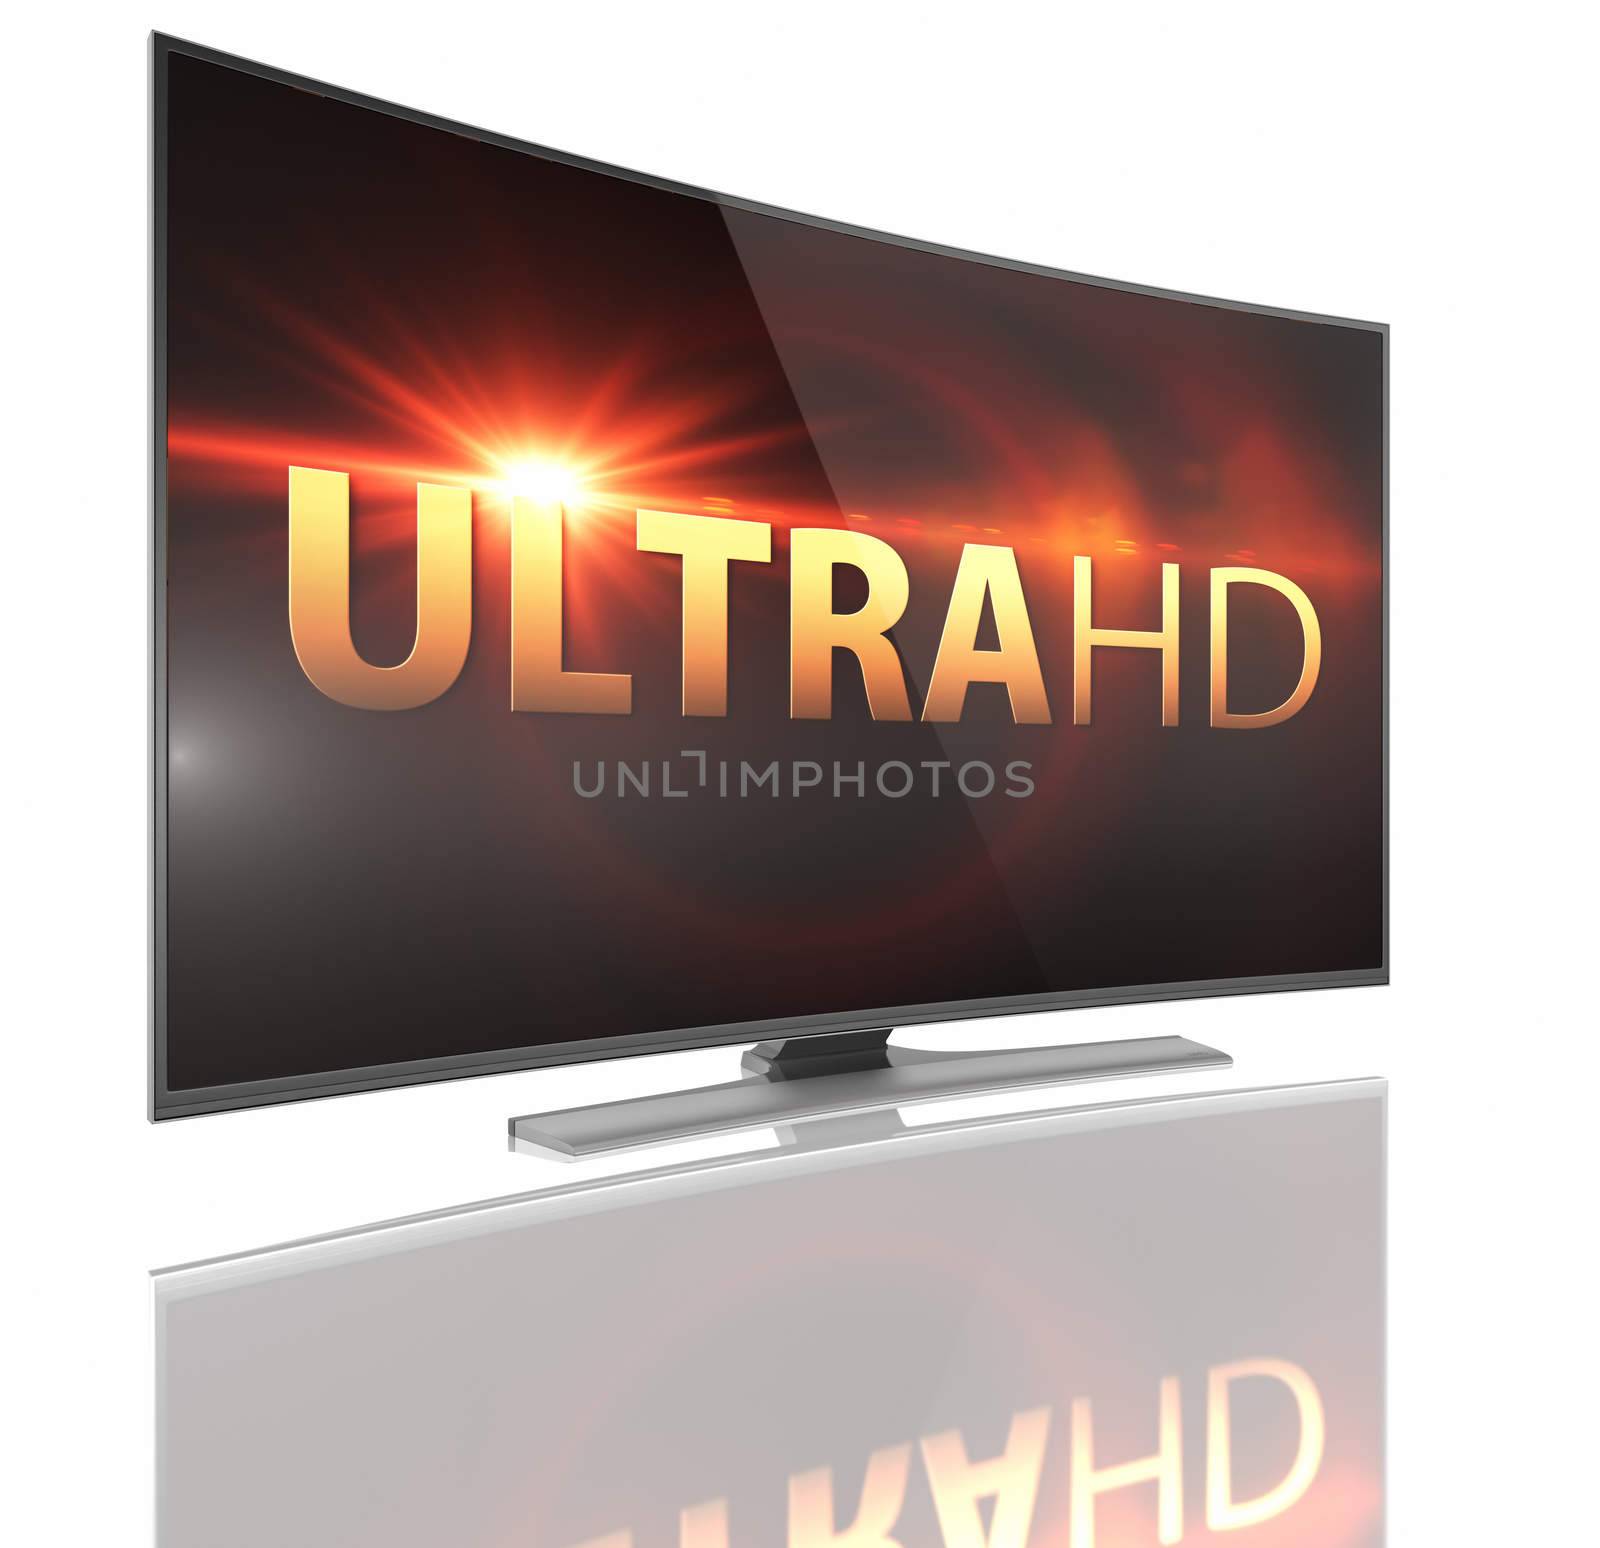 UltraHD Smart Tv with Curved screen  by manaemedia